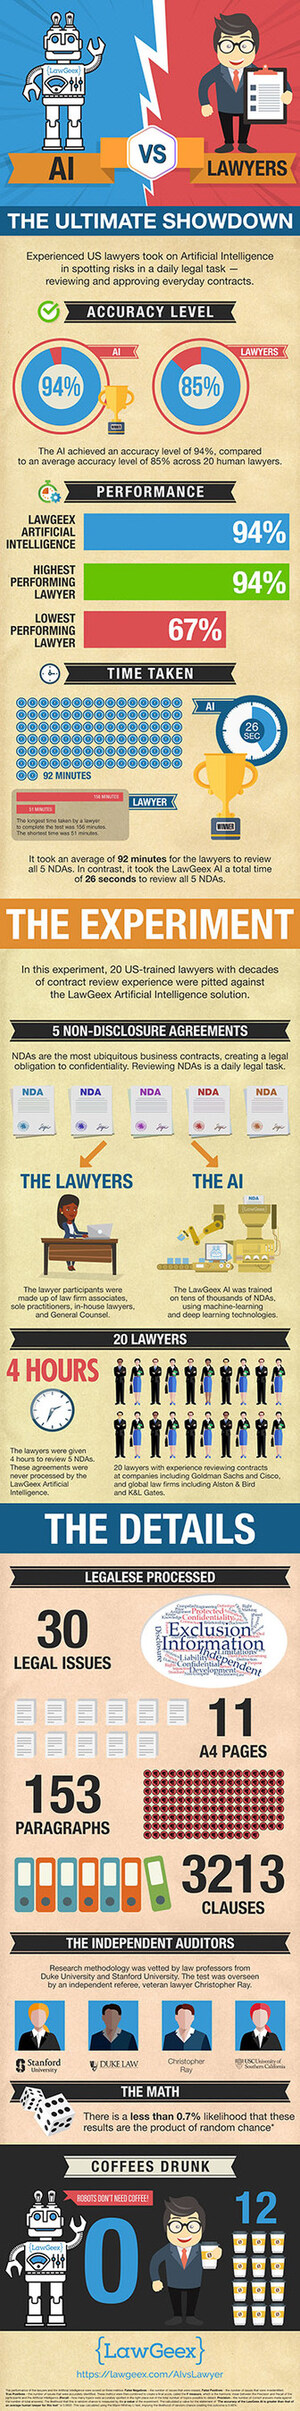 Artificial Intelligence More Accurate Than Lawyers for Reviewing Contracts, New Study Reveals